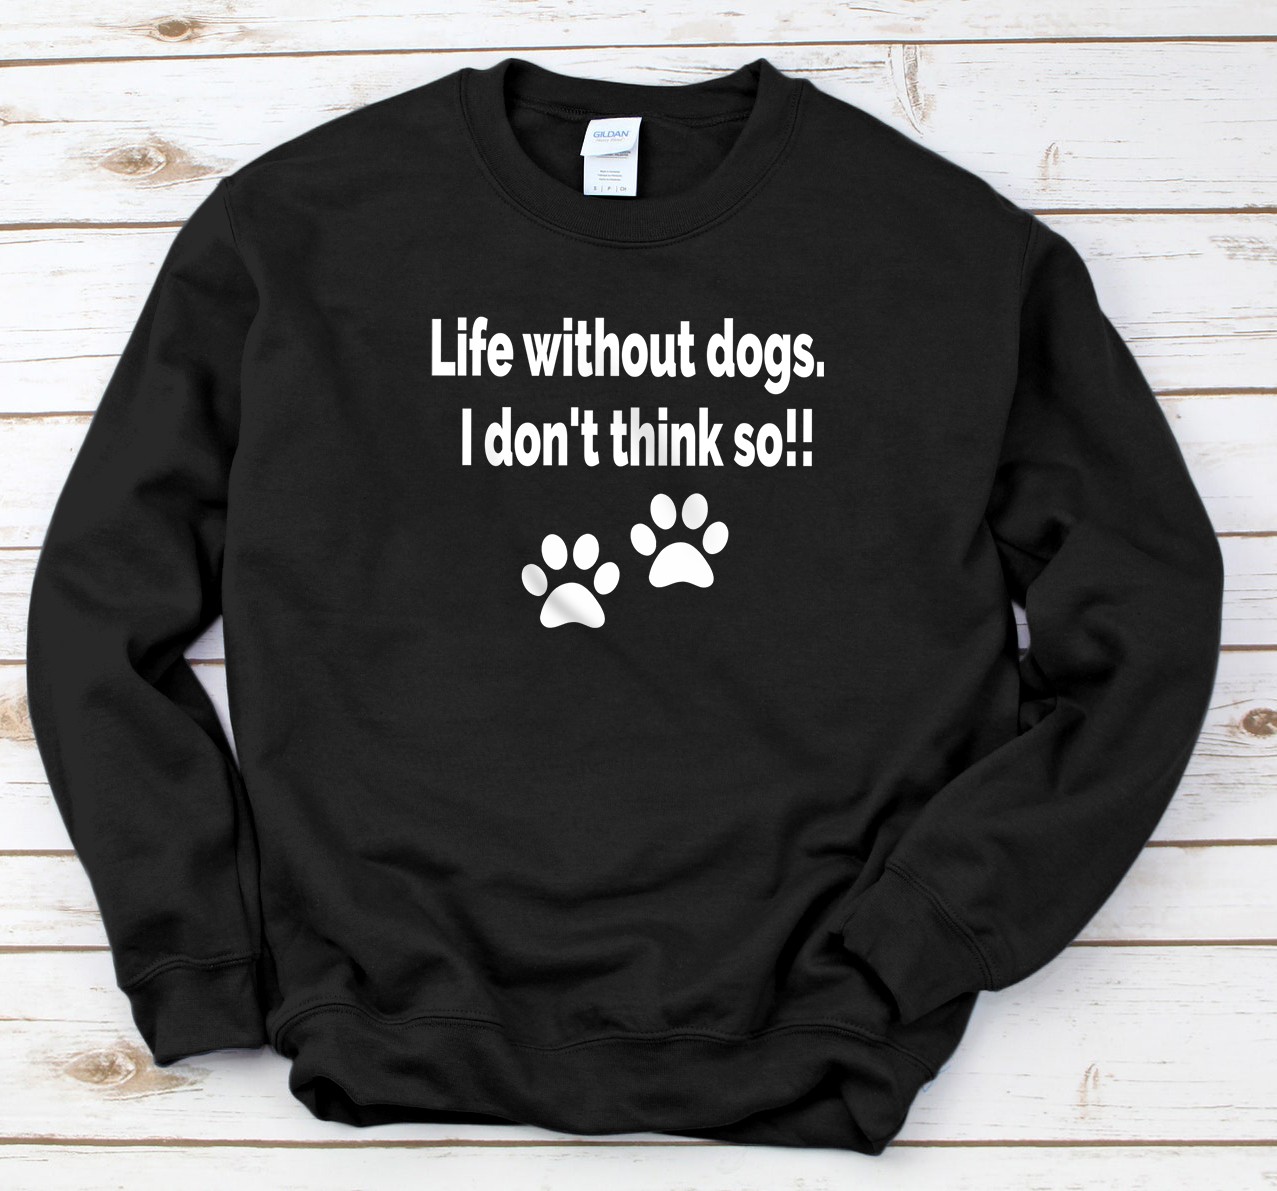 Personalized Life without dogs. I don't think so!! Sweatshirt